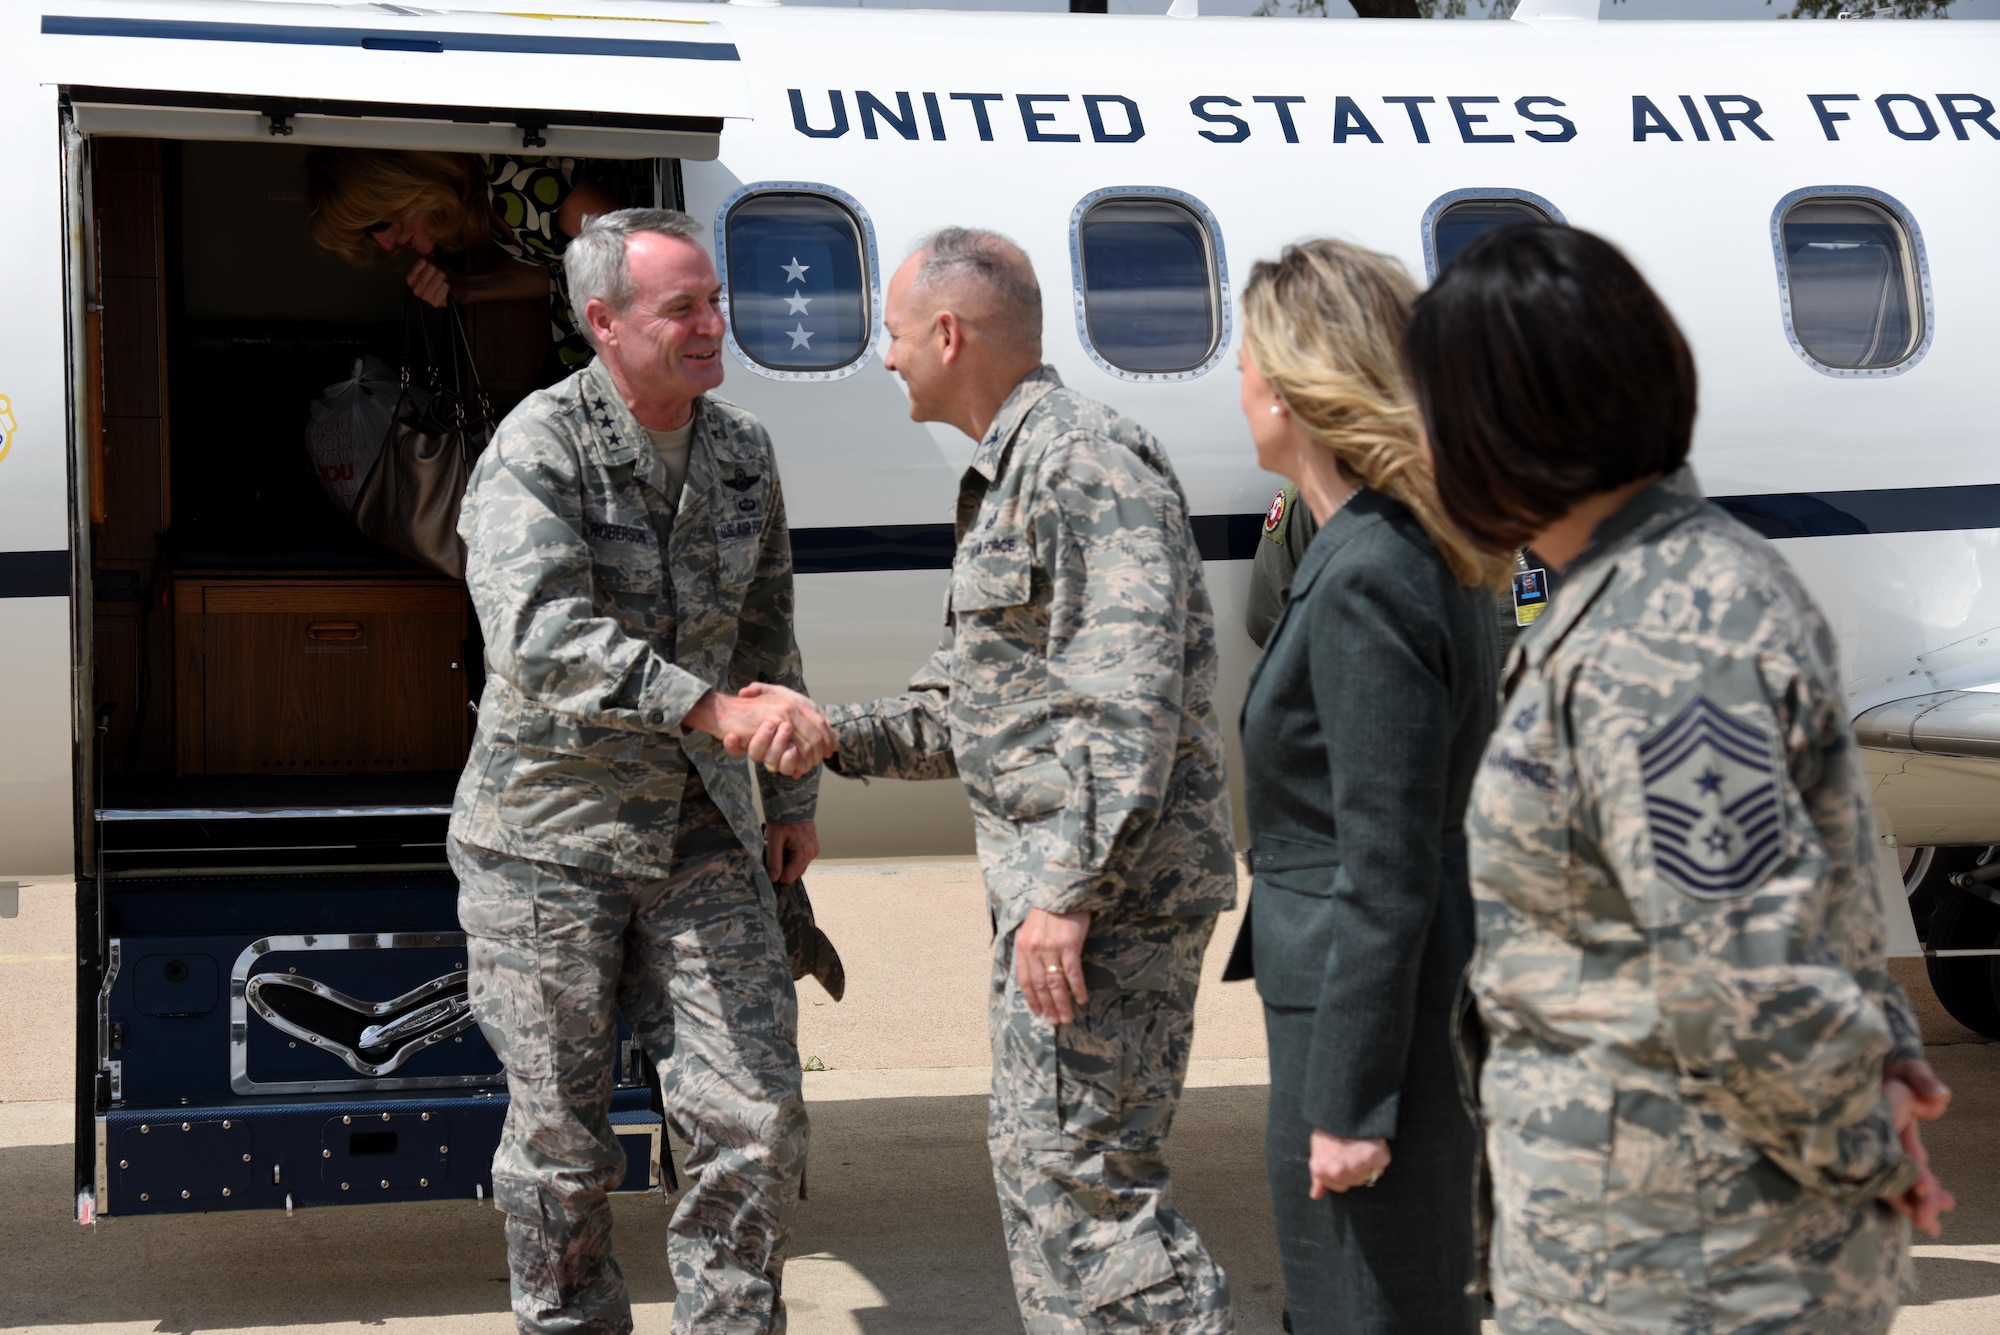 U.S. Air Force Lt. Gen. Darryl L. Roberson, commander of Air Education and Training Command, is greeted by Col. Michael L. Downs, 17th Training Wing commander, Leah Downs, , and Chief Master Sgt. JoAnne S. Bass, 17th TRW command chief, at the San Angelo Regional Airport, San Angelo, Texas, March 17, 2016. Roberson’s visit to Goodfellow is his first since taking command. (U.S. Air Force photo by Senior Airman Joshua Edwards/Released)